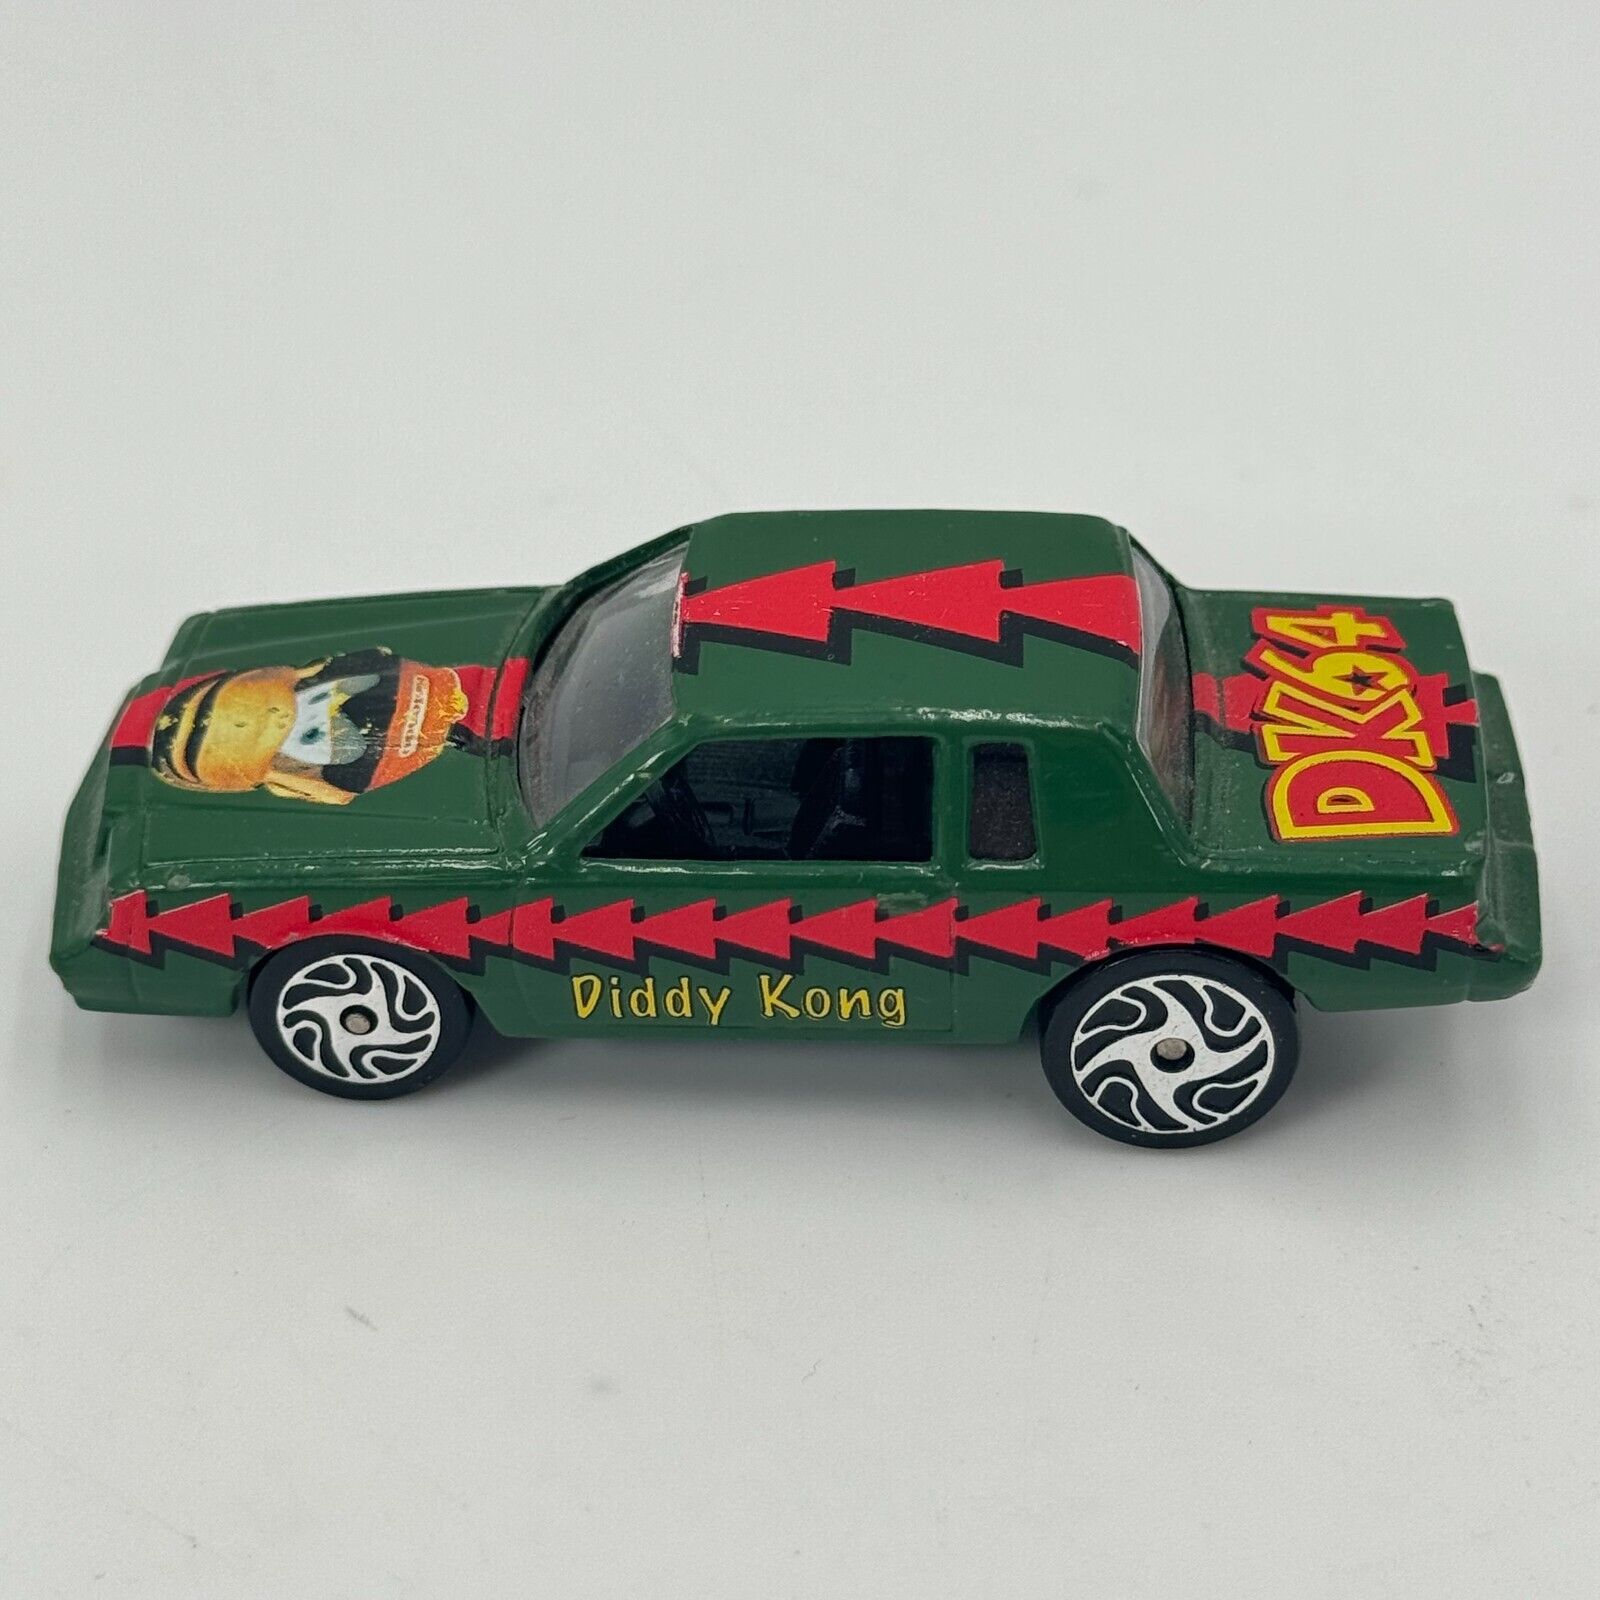 Racing Champions DK64 Diddy Buick Lanky Chevy Collectible Car Nintendo 2pc